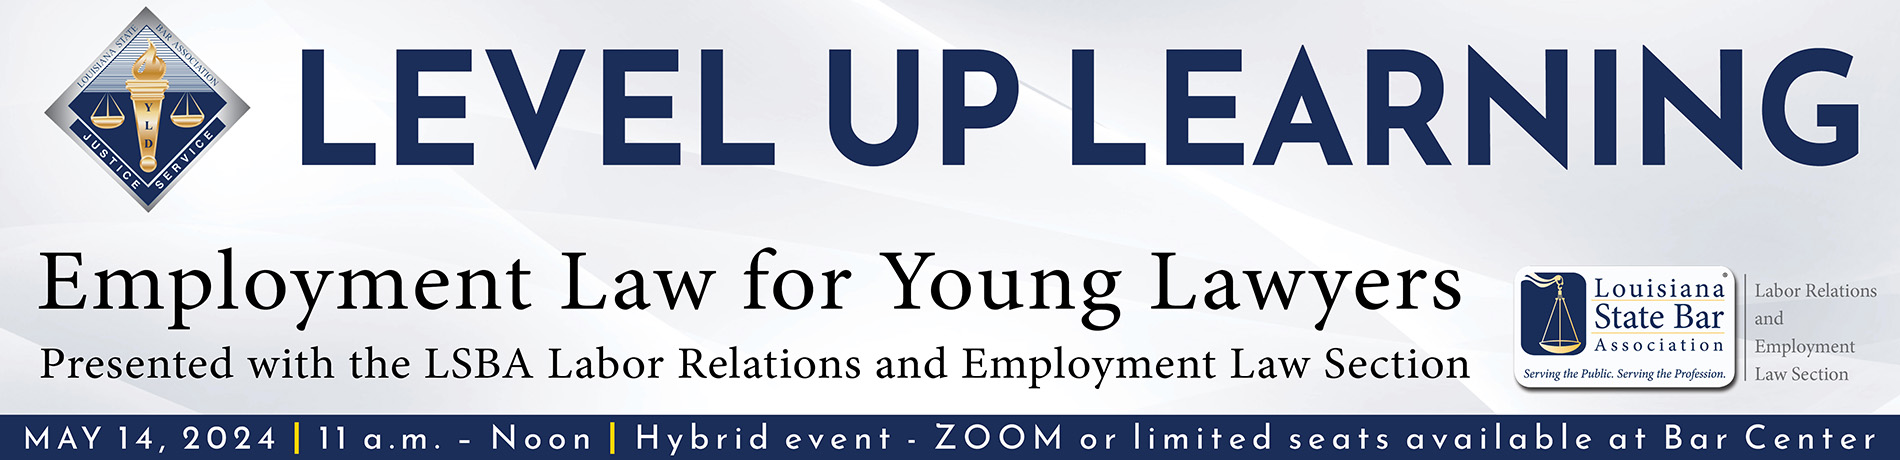 2024 YLD Level Up Learning Employment Law 